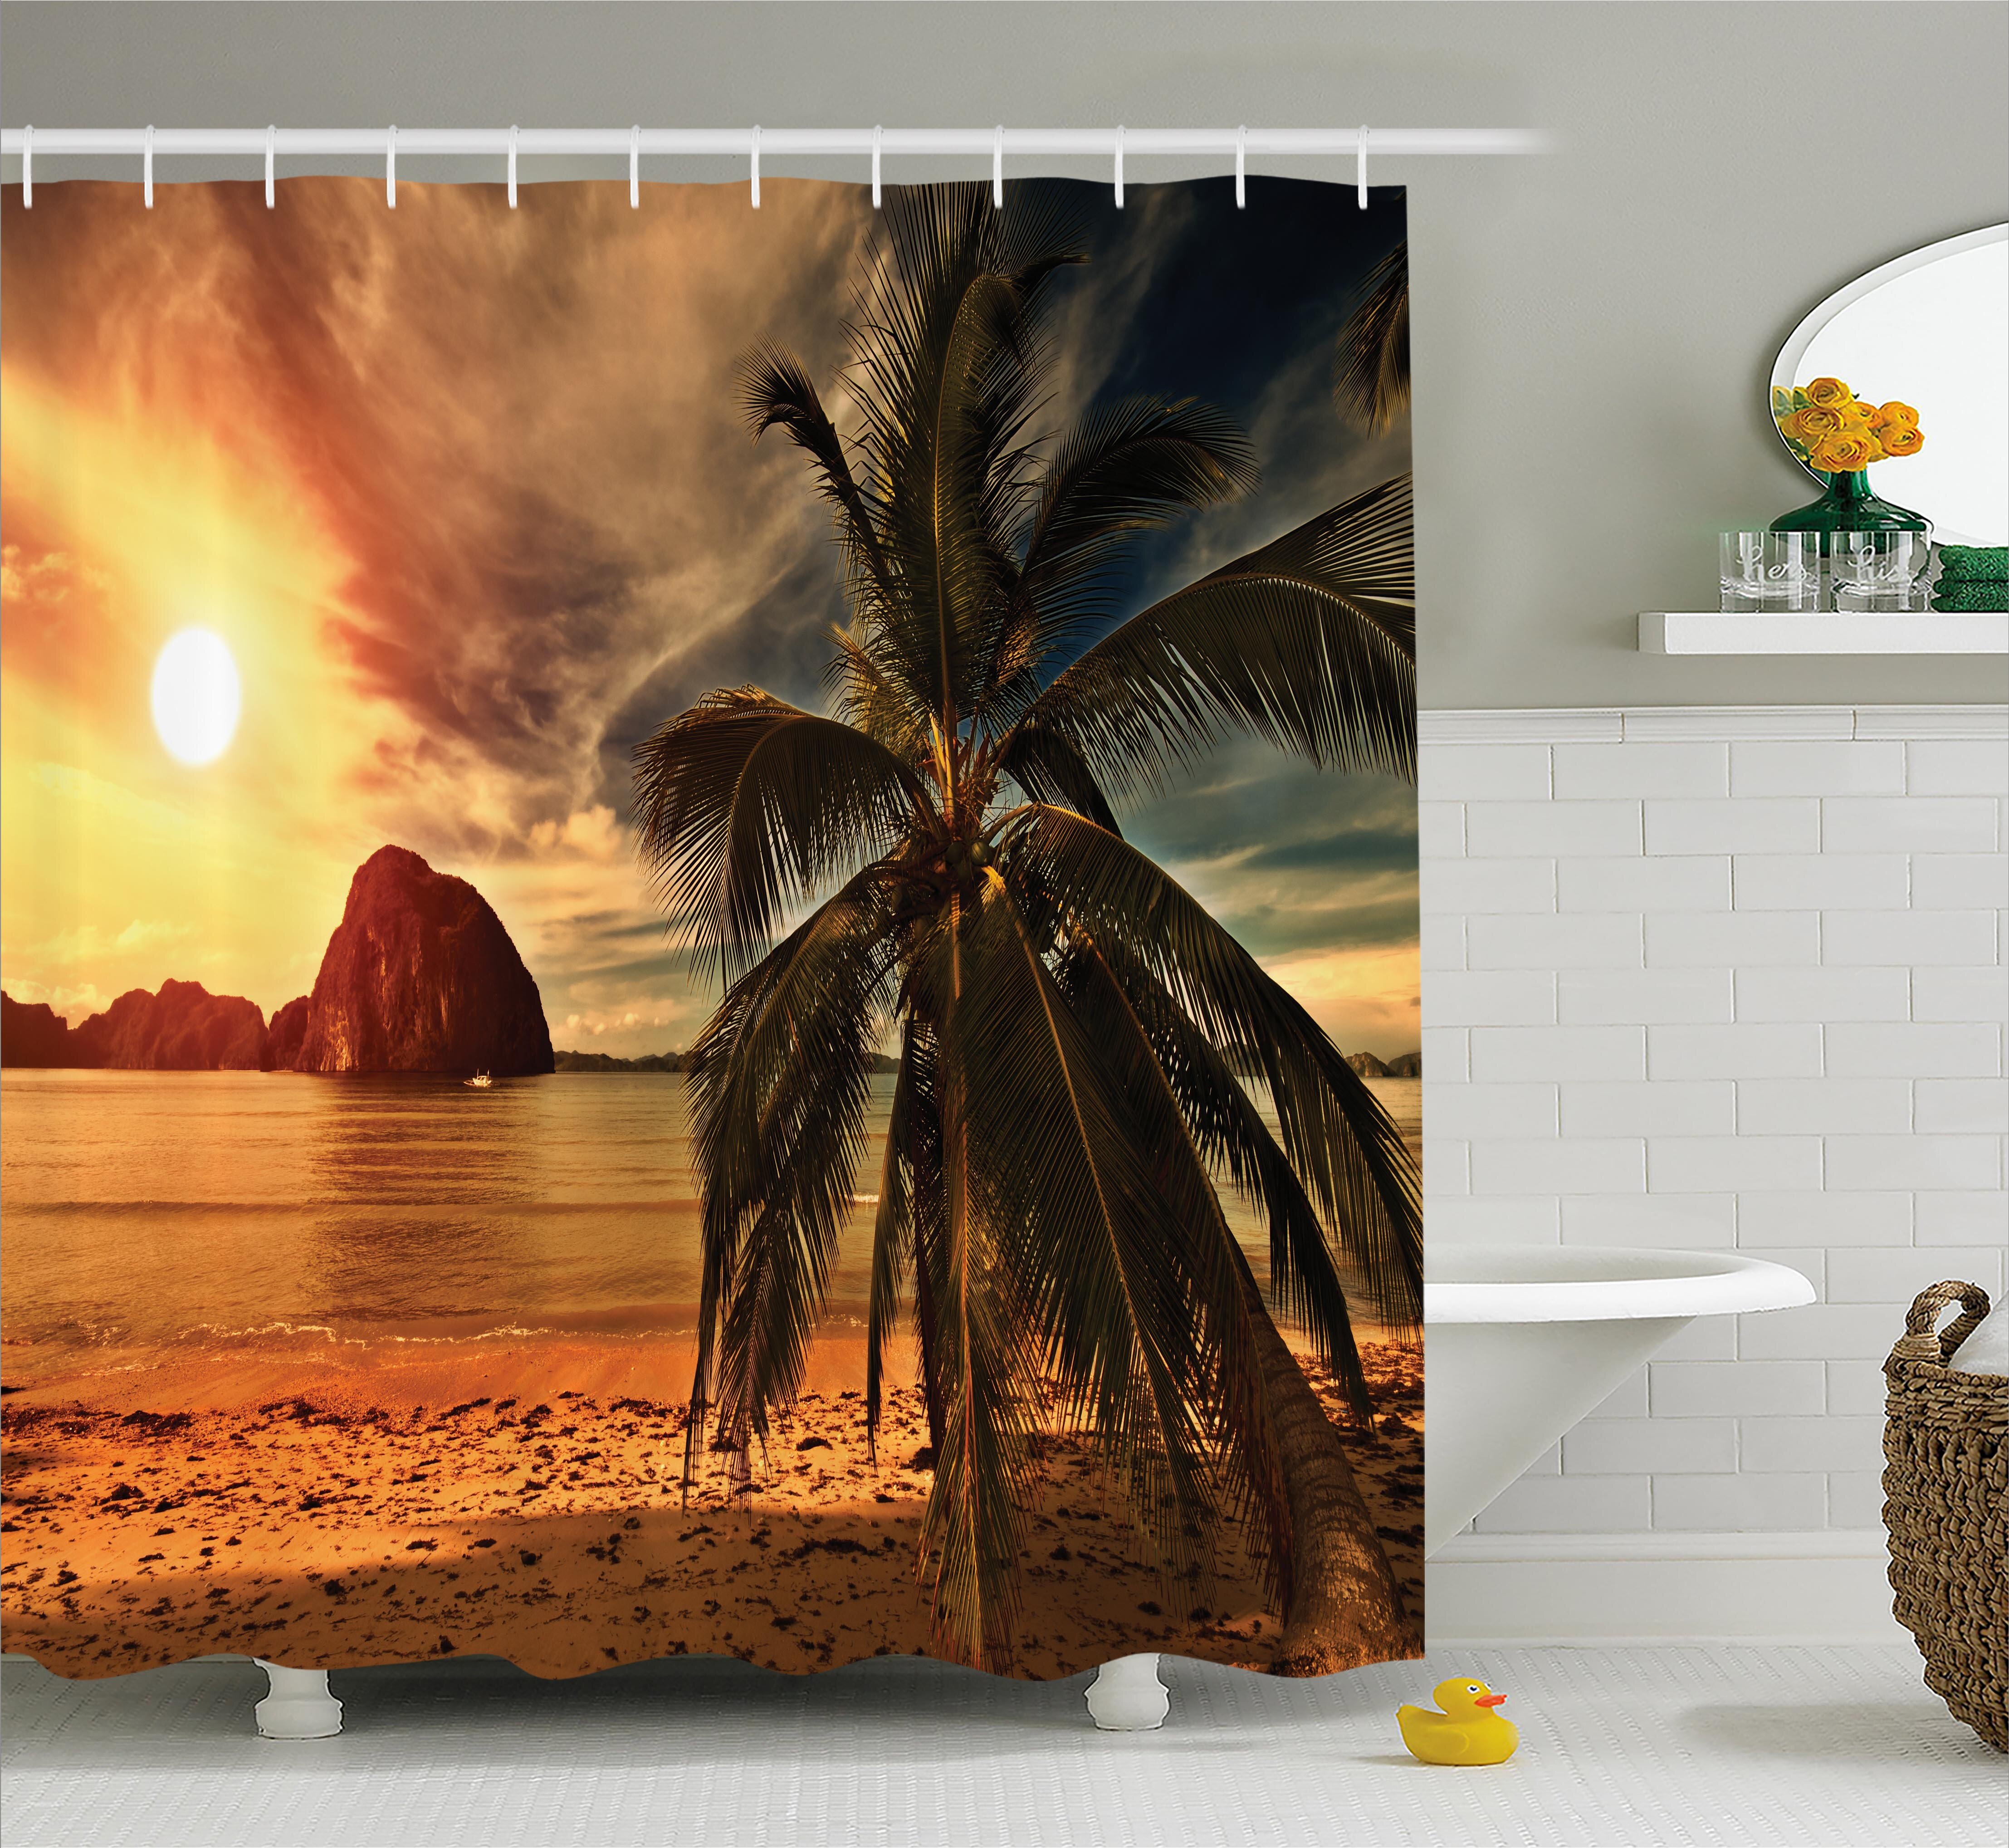 Details about   Tropical Palm Tree Shower Curtain Bathroom Decor Fabric & 12hooks 